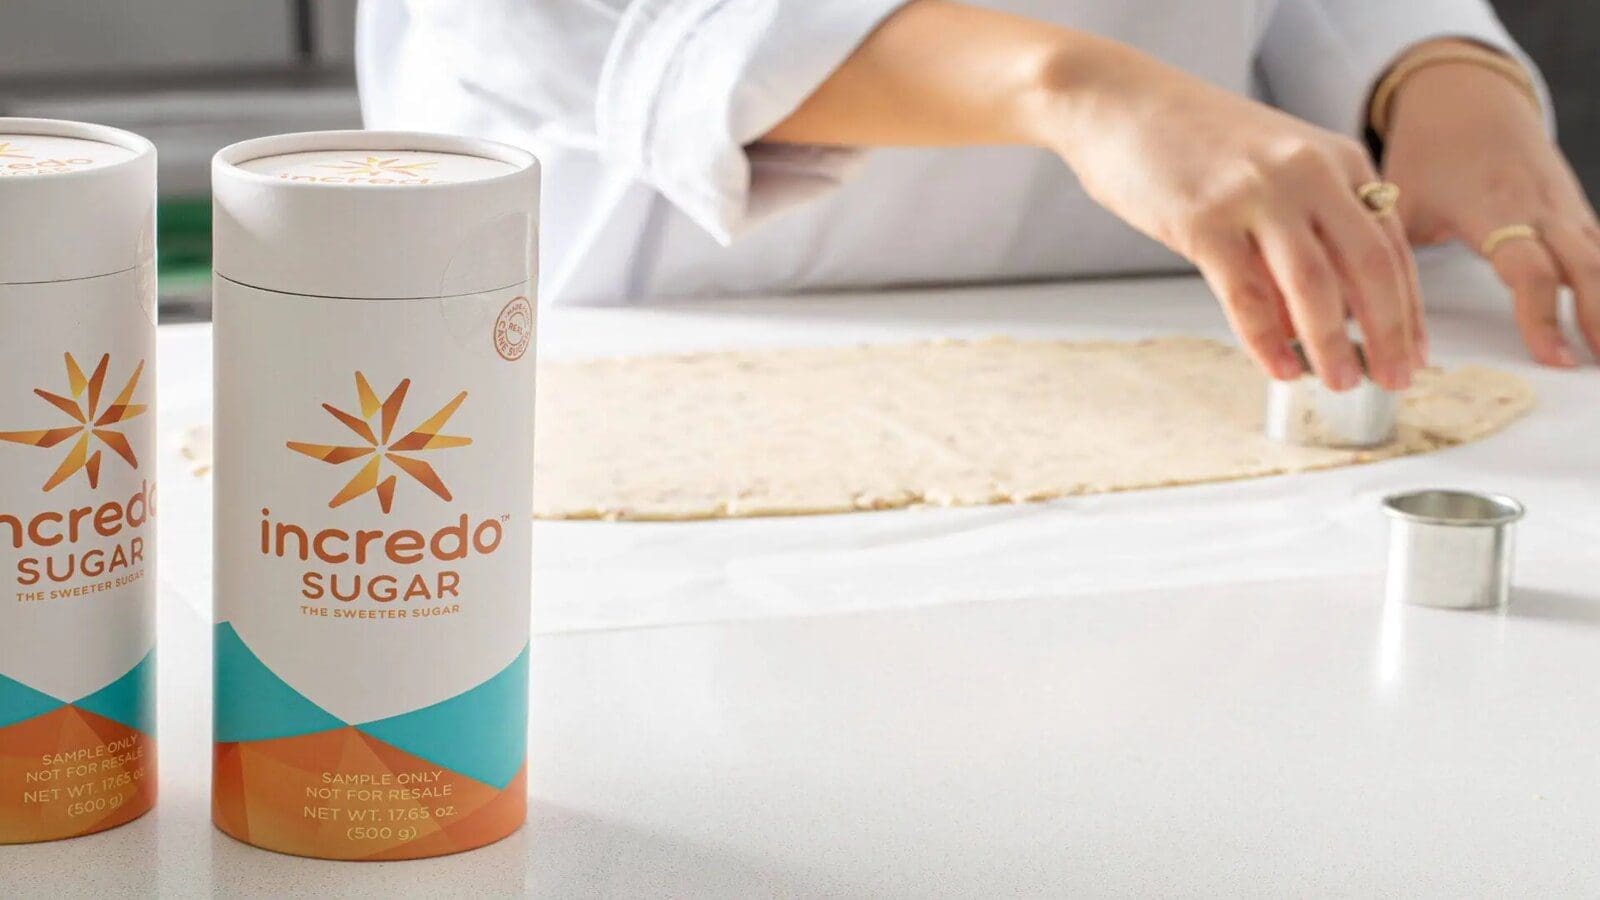 Israel food tech ‘DouxMatok’ rebrands as ‘Incredo’ to align with its flagship brand ‘Incredo Sugar’